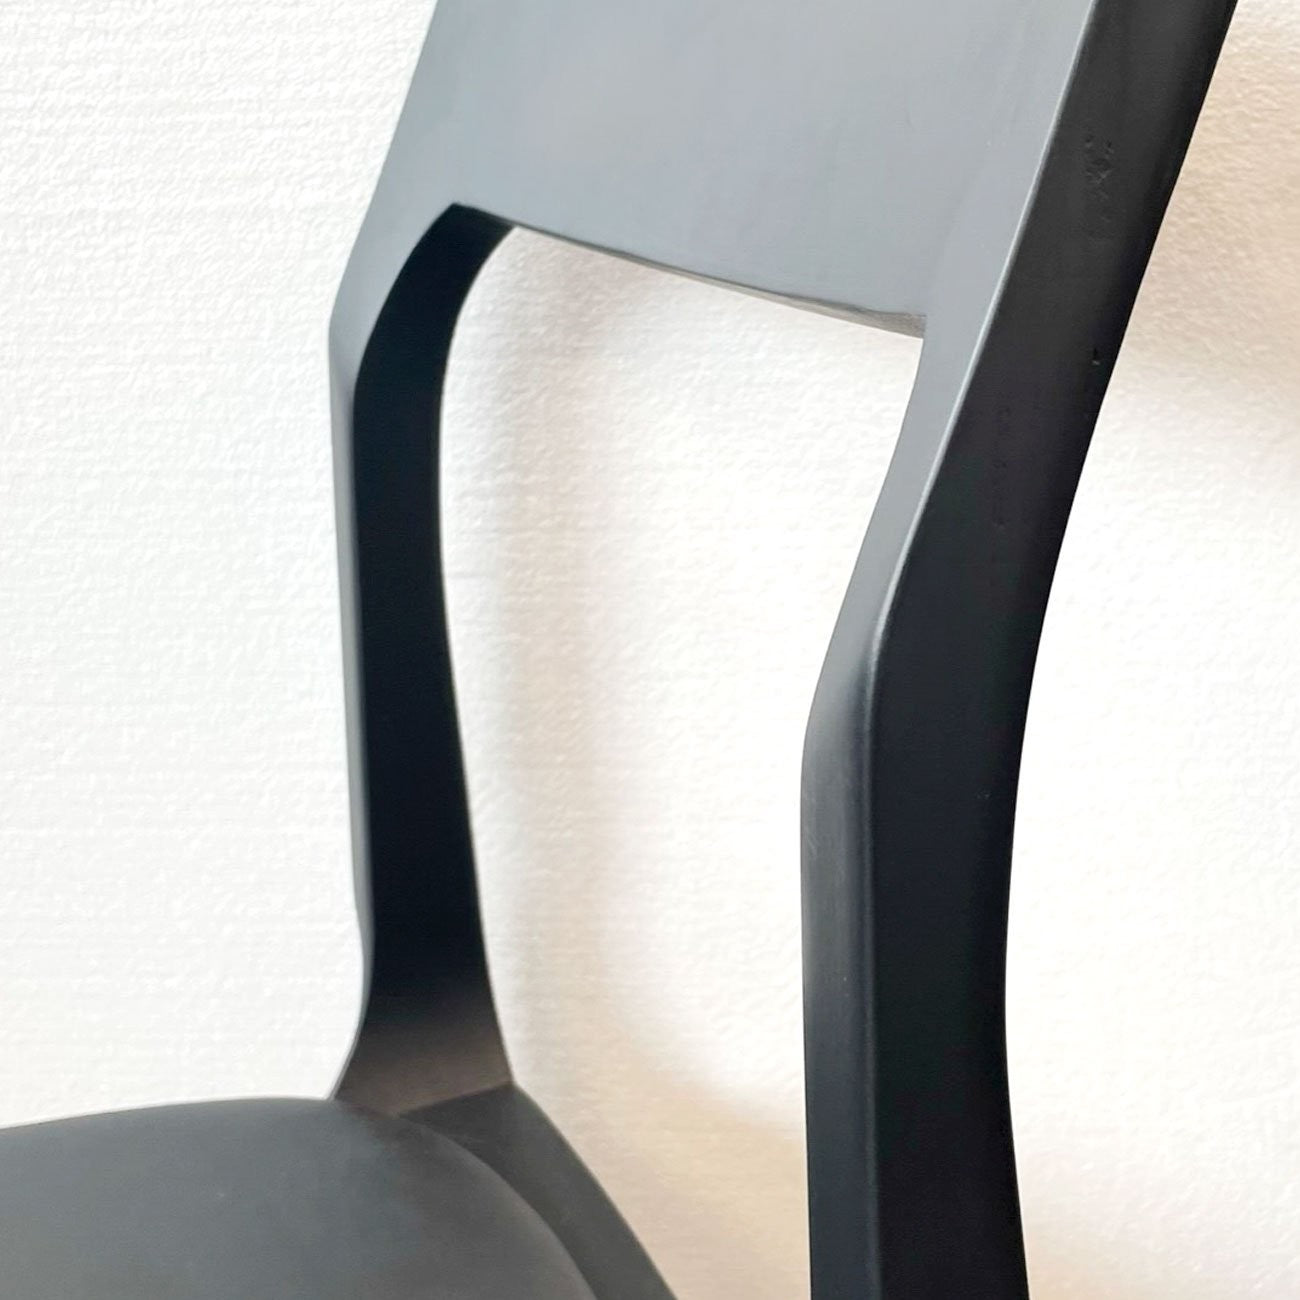 Carson Dining Chair - Black Leather